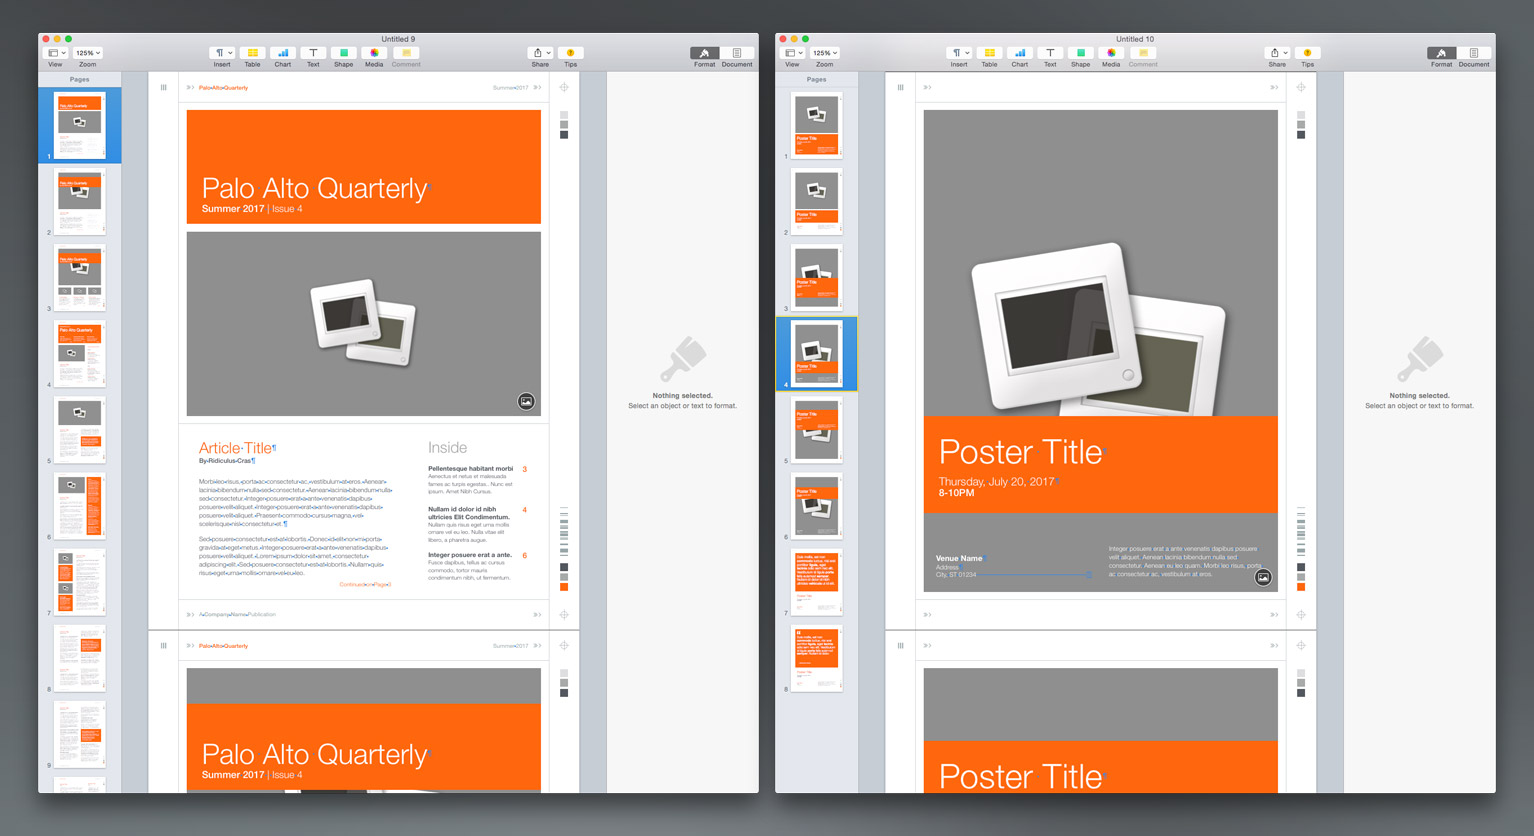 Our starting point: a new Newsletter Template and a Poster Template we'll draw elements from.